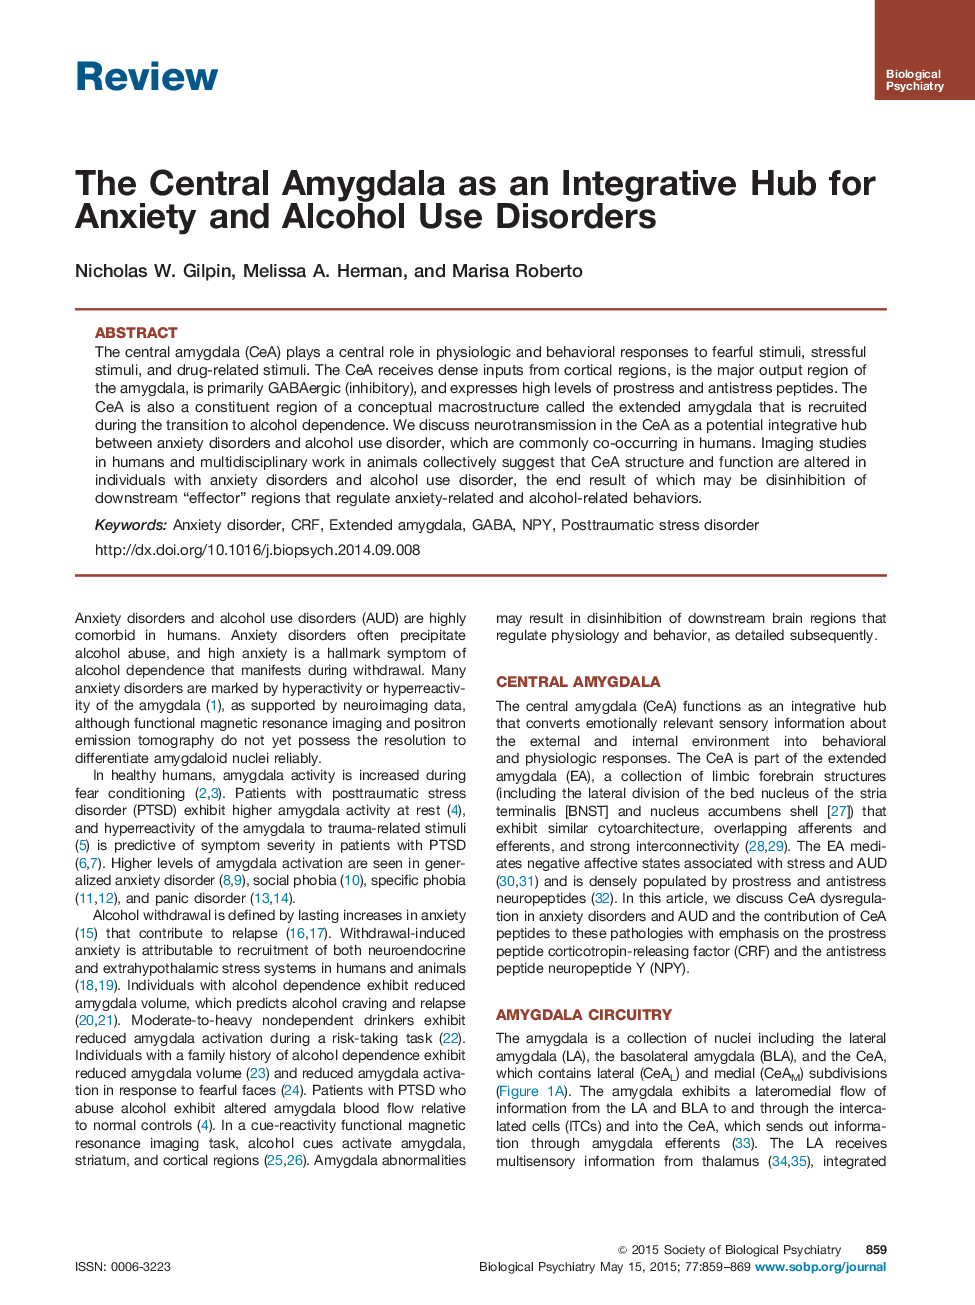 The Central Amygdala as an Integrative Hub for Anxiety and Alcohol Use Disorders